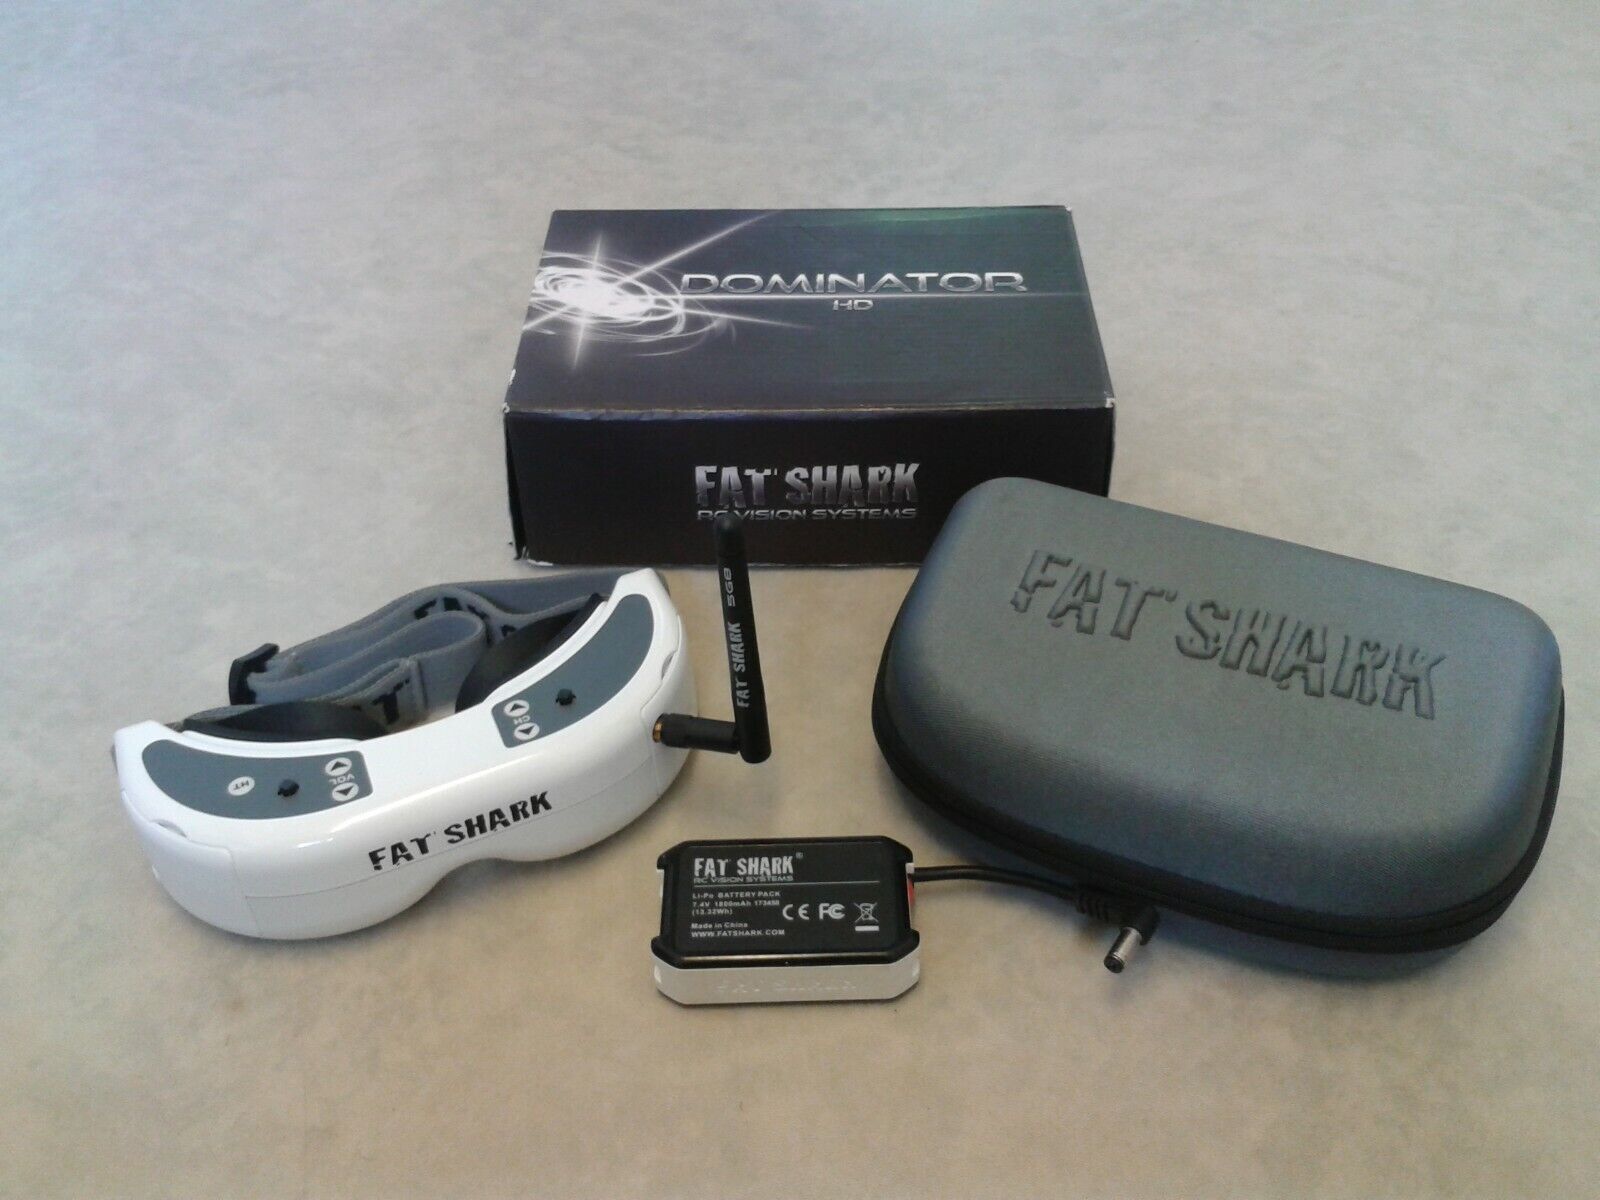 HD FPV Goggles for Racing Drones